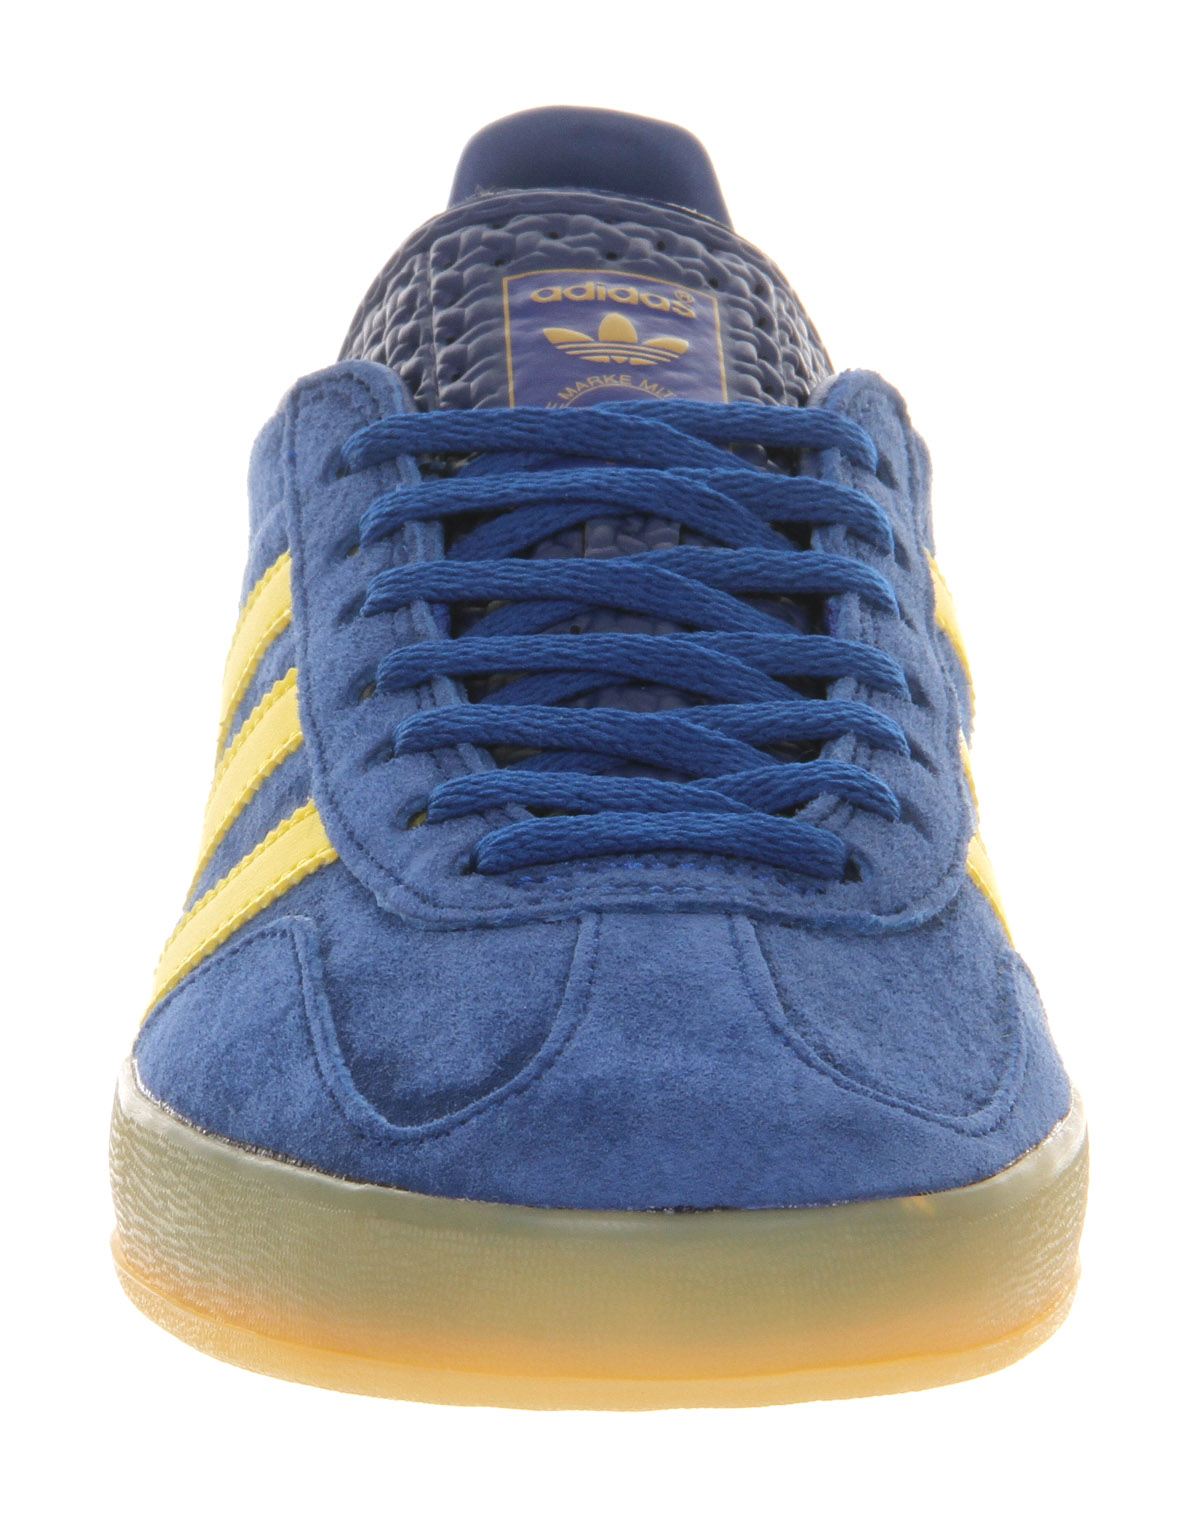 adidas Gazelle Indoor Royal Blue Yellow for Men - Lyst